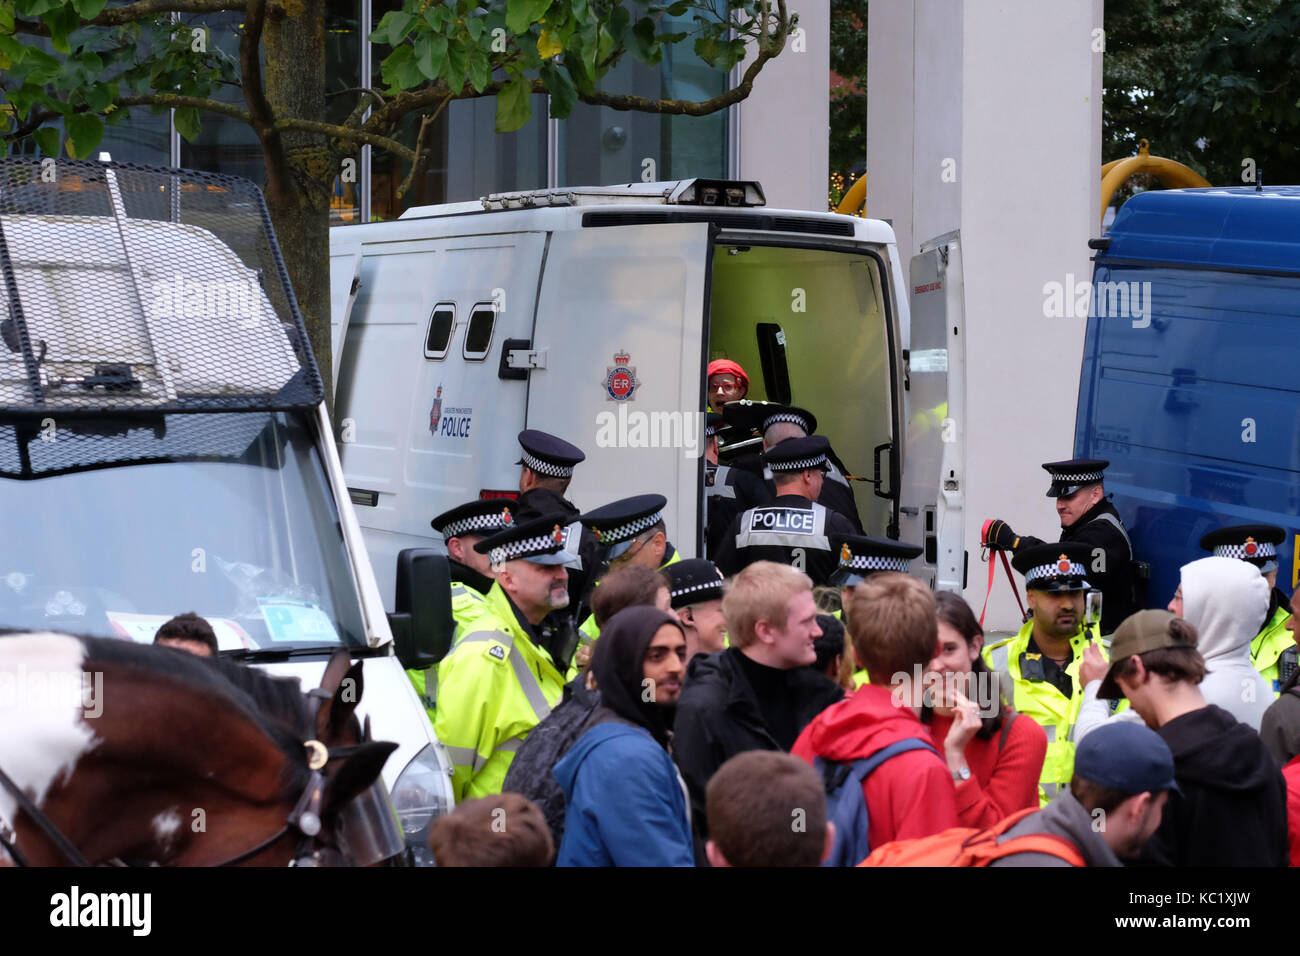 St Peters Square, Manchester, UK - Sunday 1st October 2017 - Police officers detain a wheelchair bound protester inside a police van after tram tracks were obstructed by protesters outside the Conservative Party Conference. Photo Steven May / Alamy Live News Stock Photo